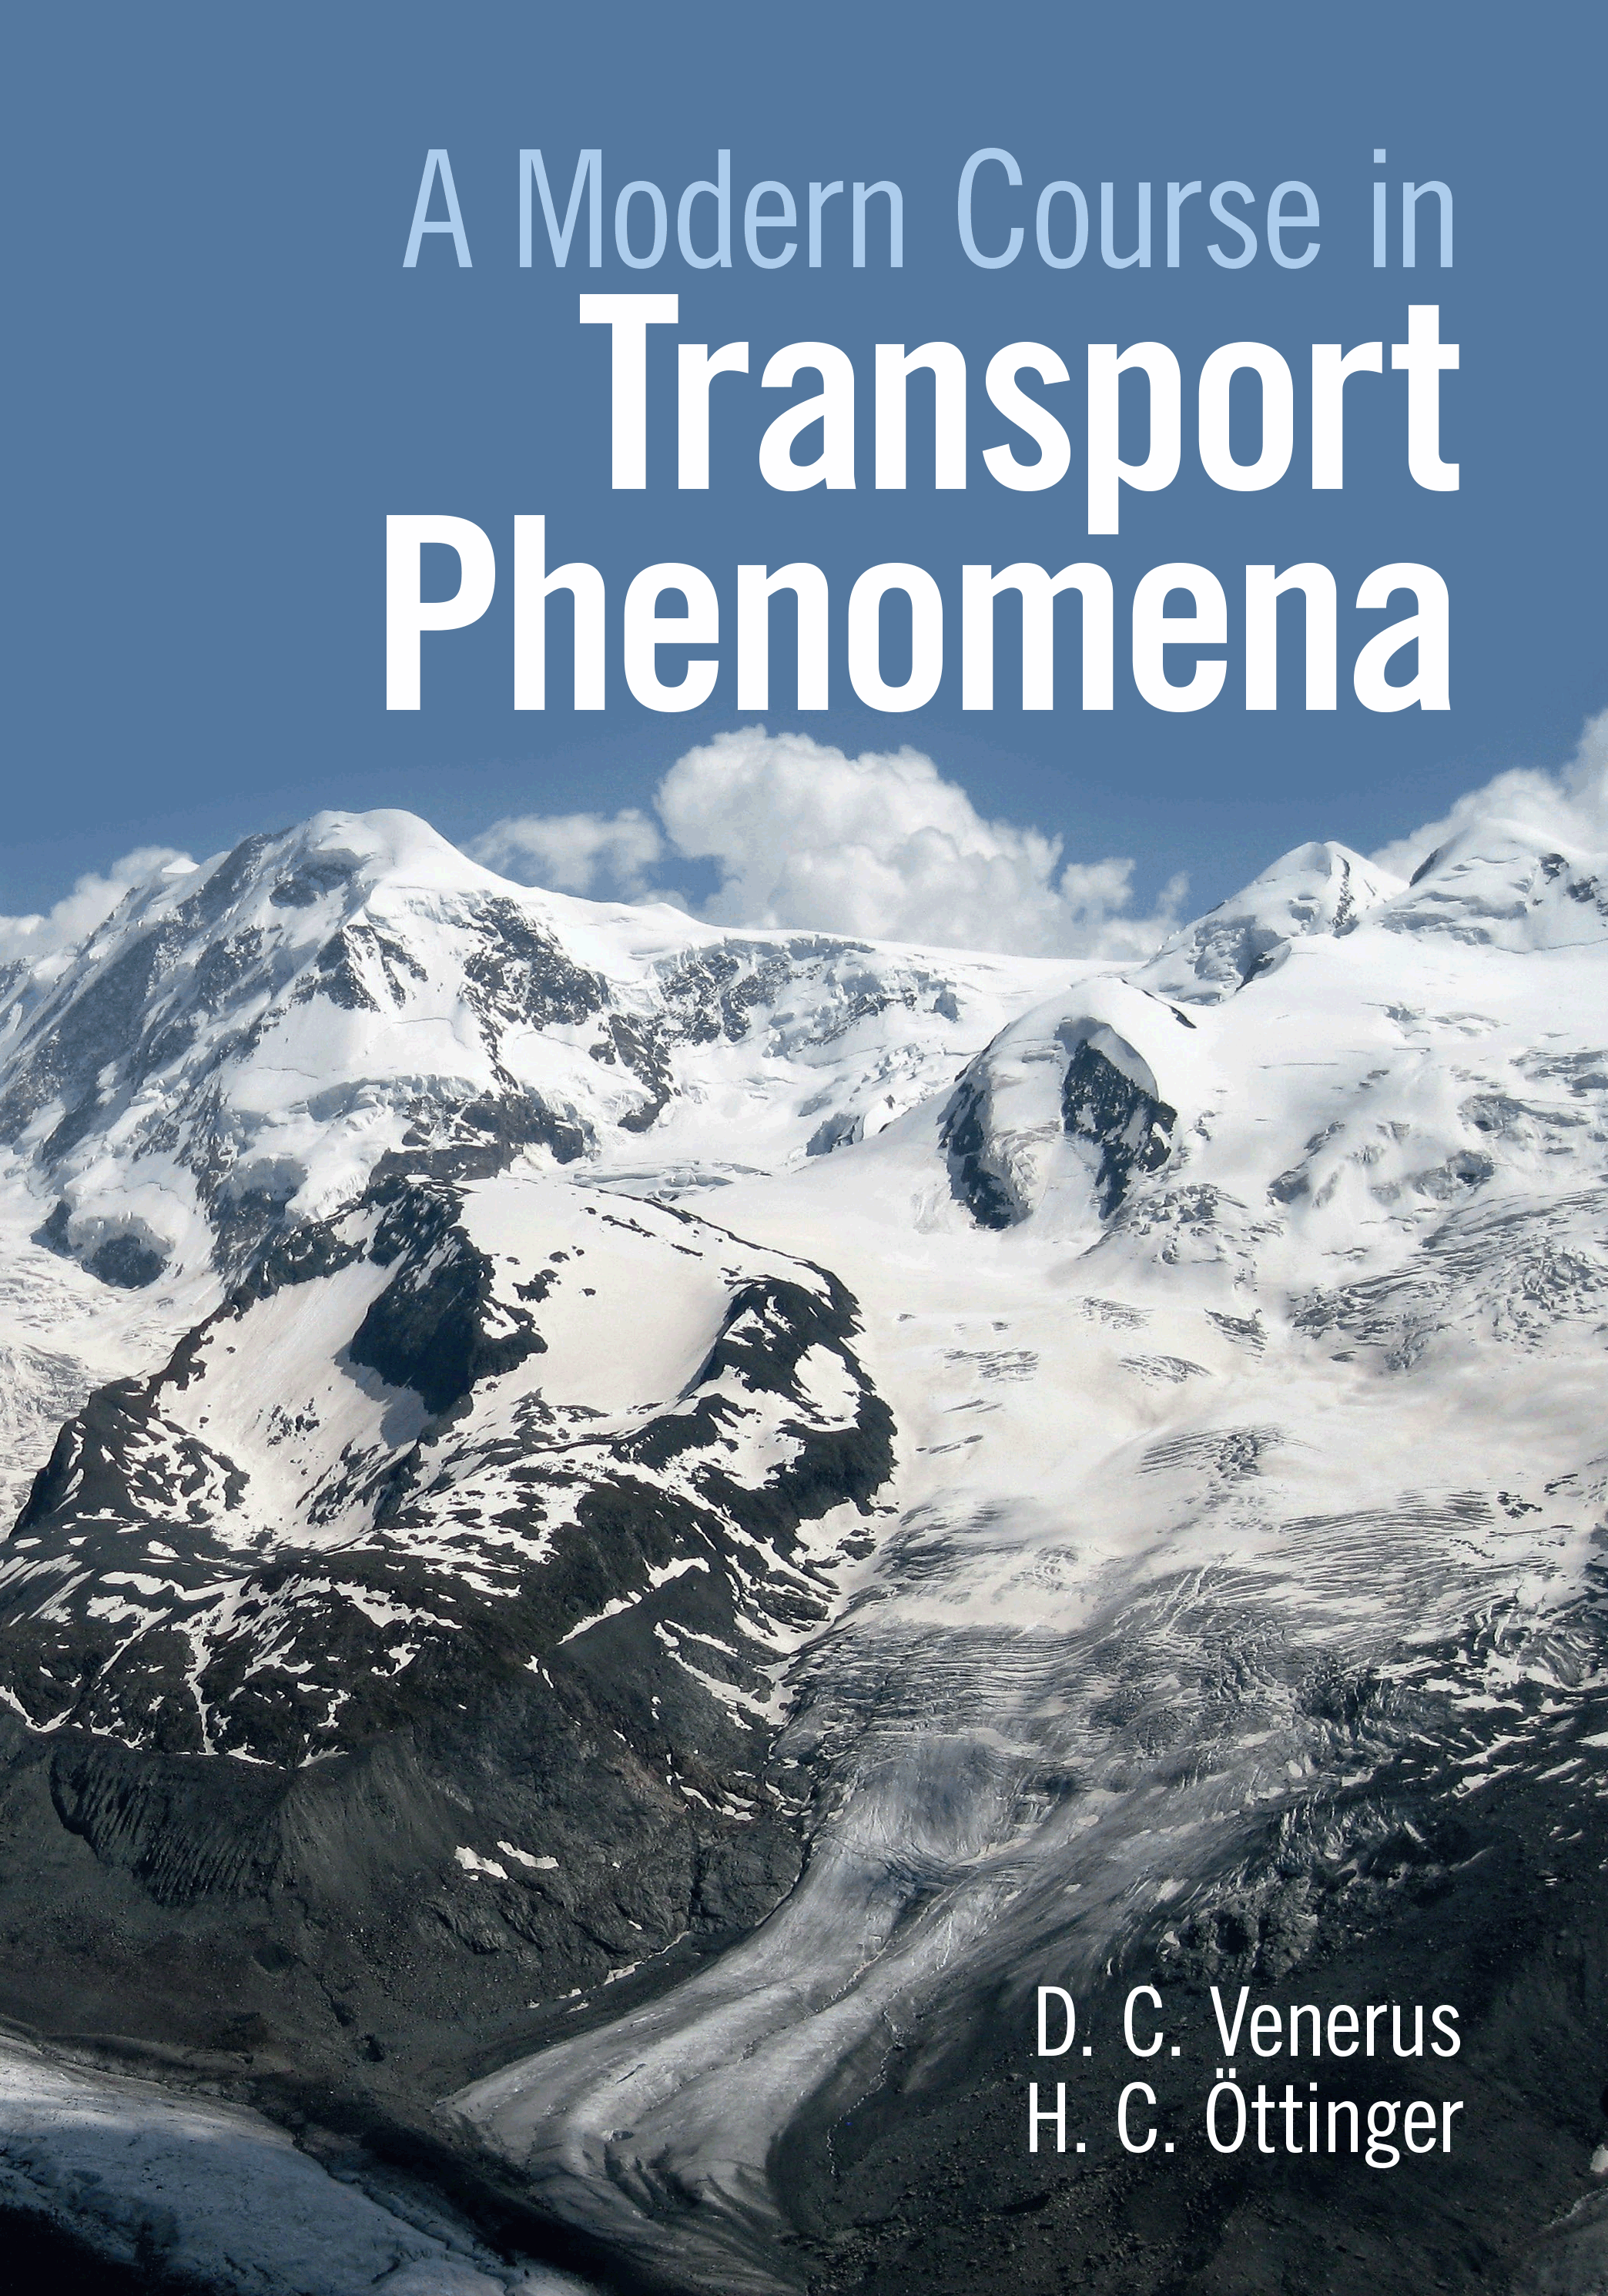 Enlarged view: A modern course in transport phenomena